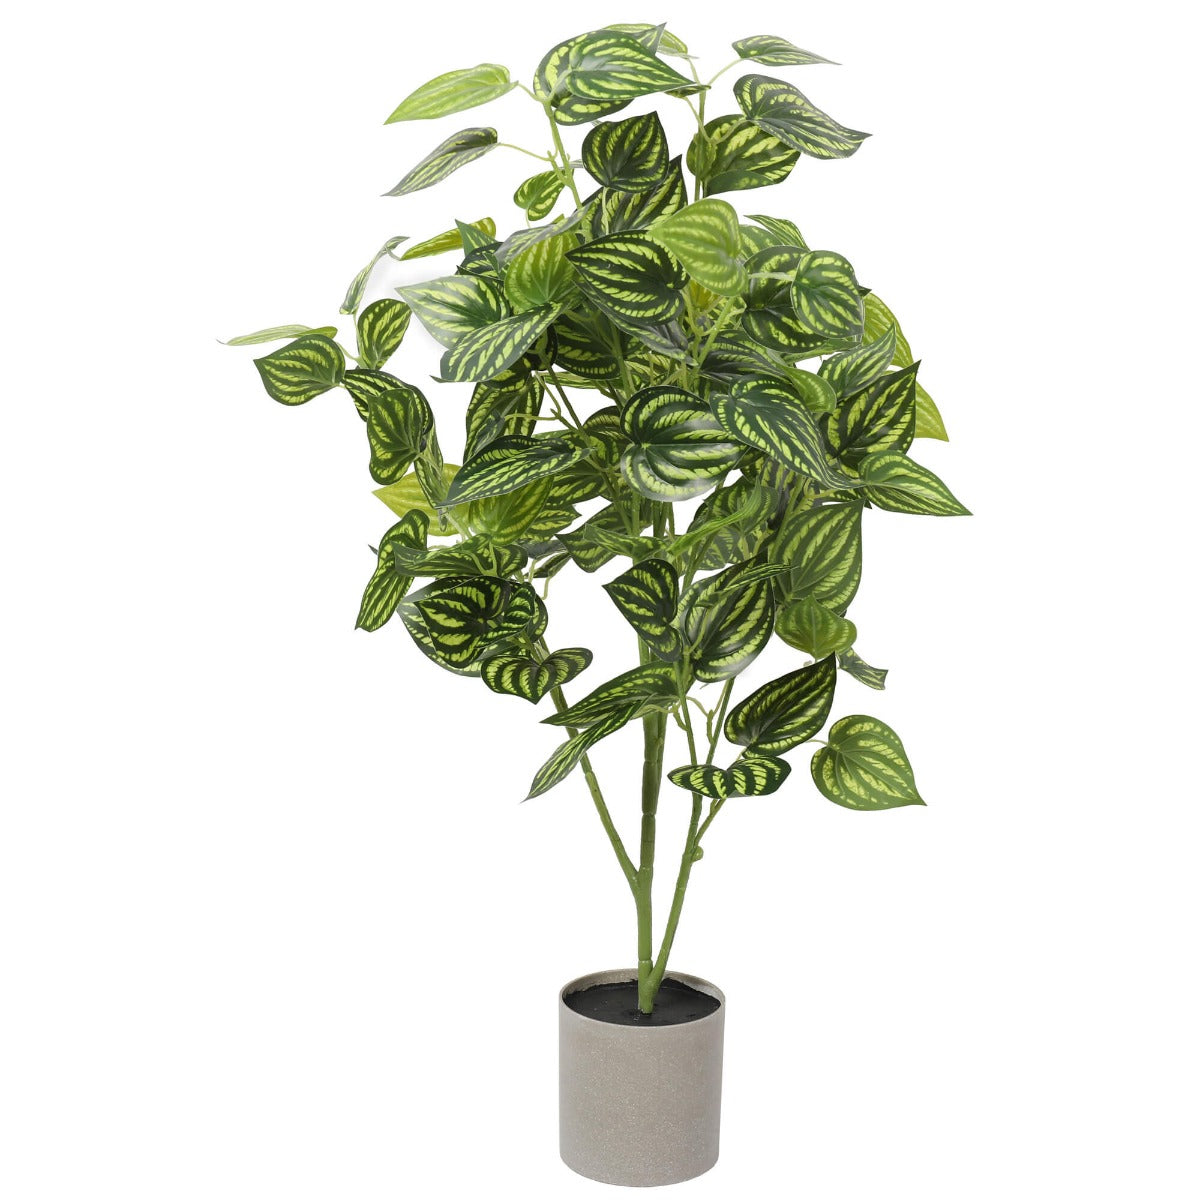 Bright Mixed Philodendron Plant 70cm